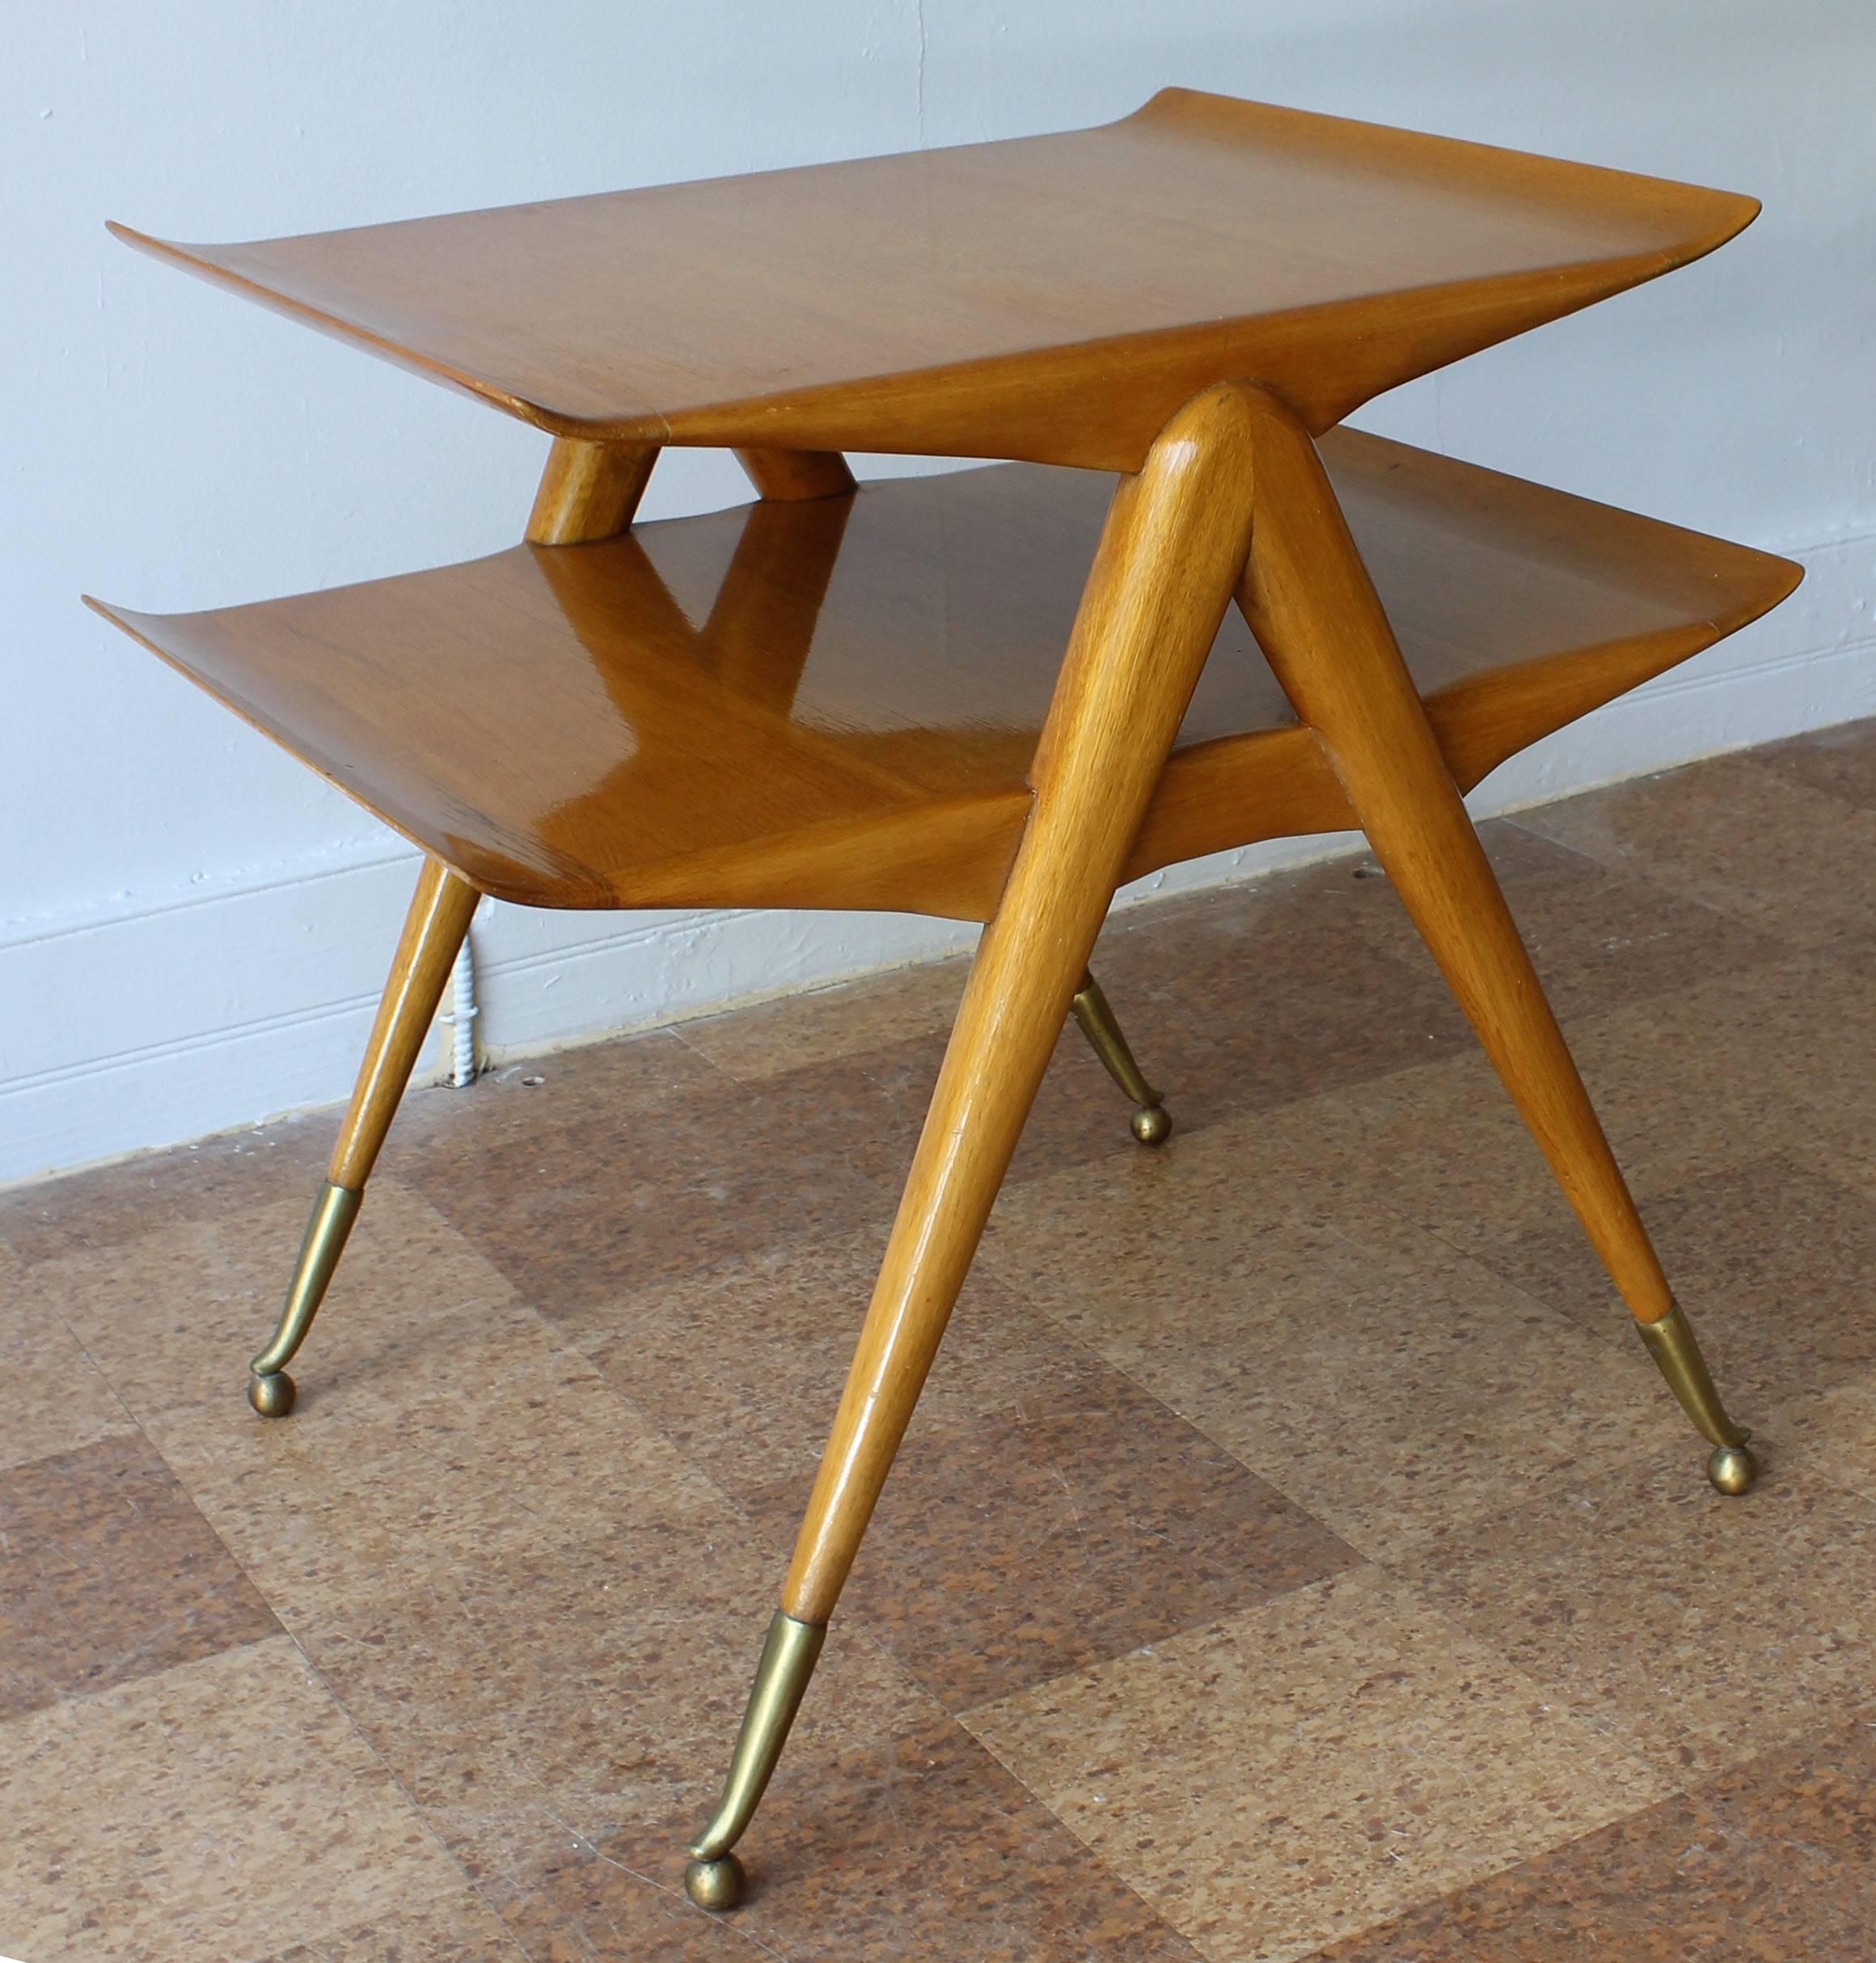 Magnificent two-tier maple side table with delicate brass sabots, attributed to Ico & Luisa Parisi